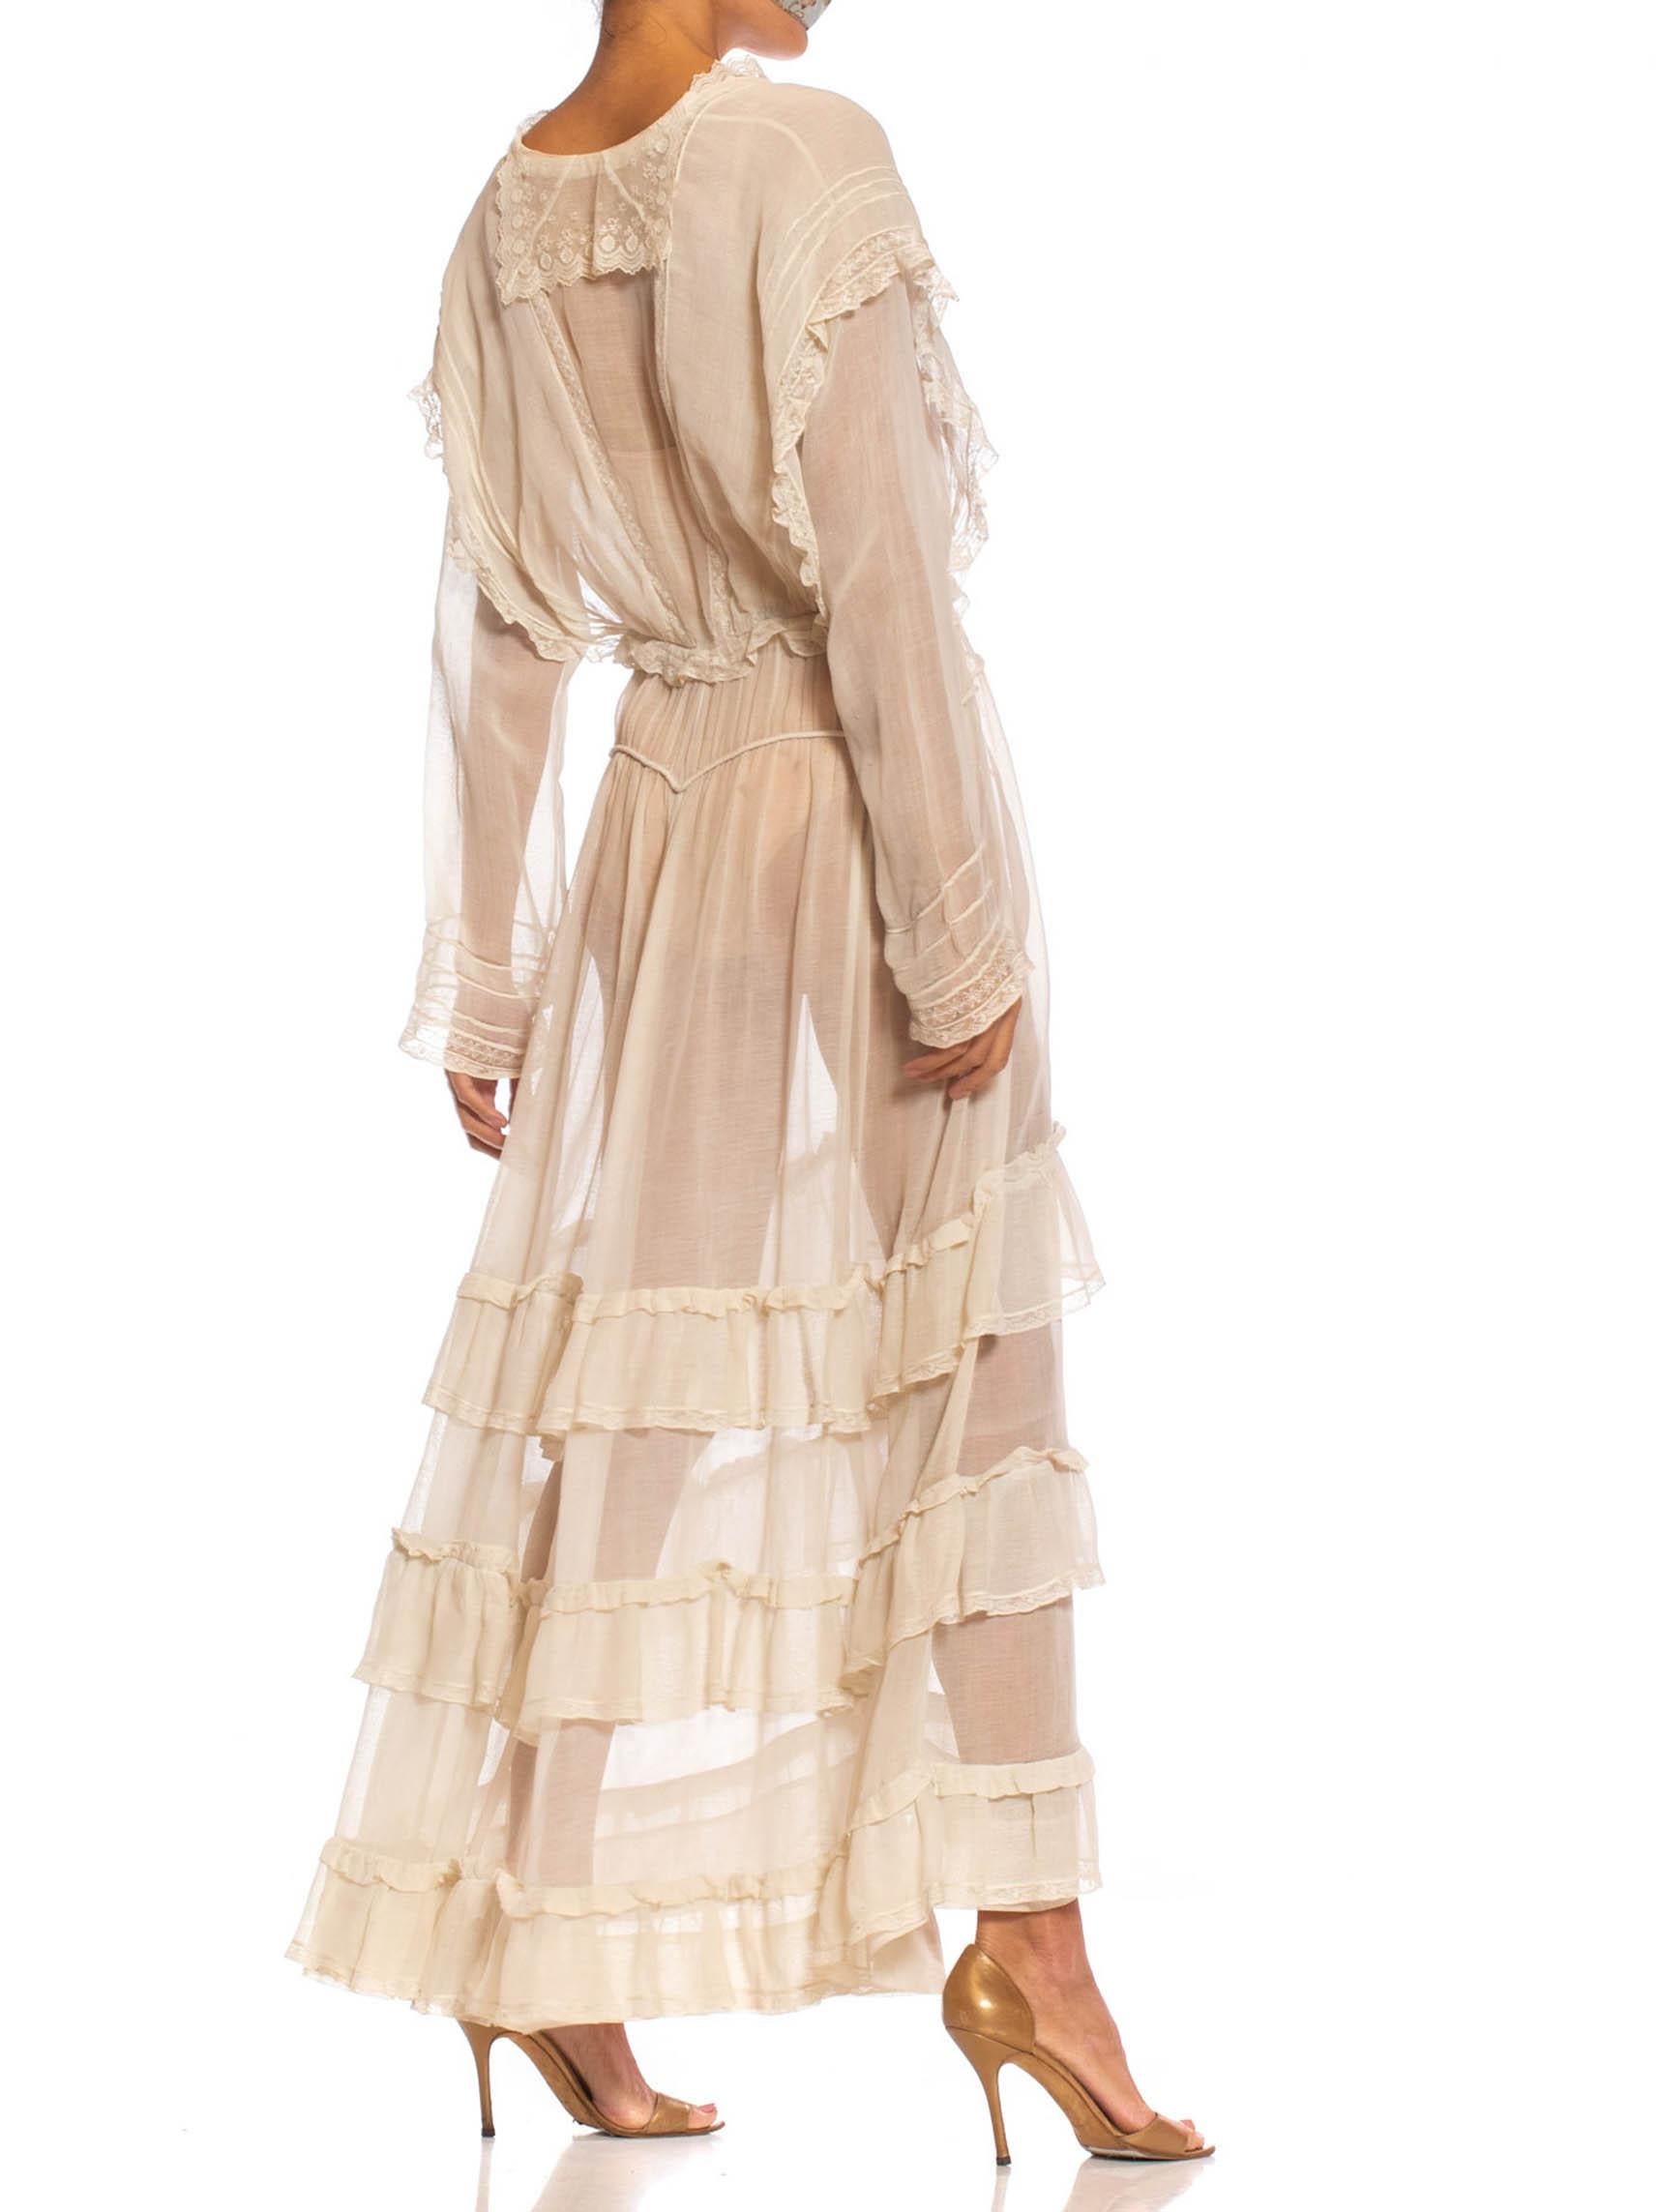 Edwardian Off White Organic Cotton Voile & Lace Long Sleeved Ruffled Tea Dress 1